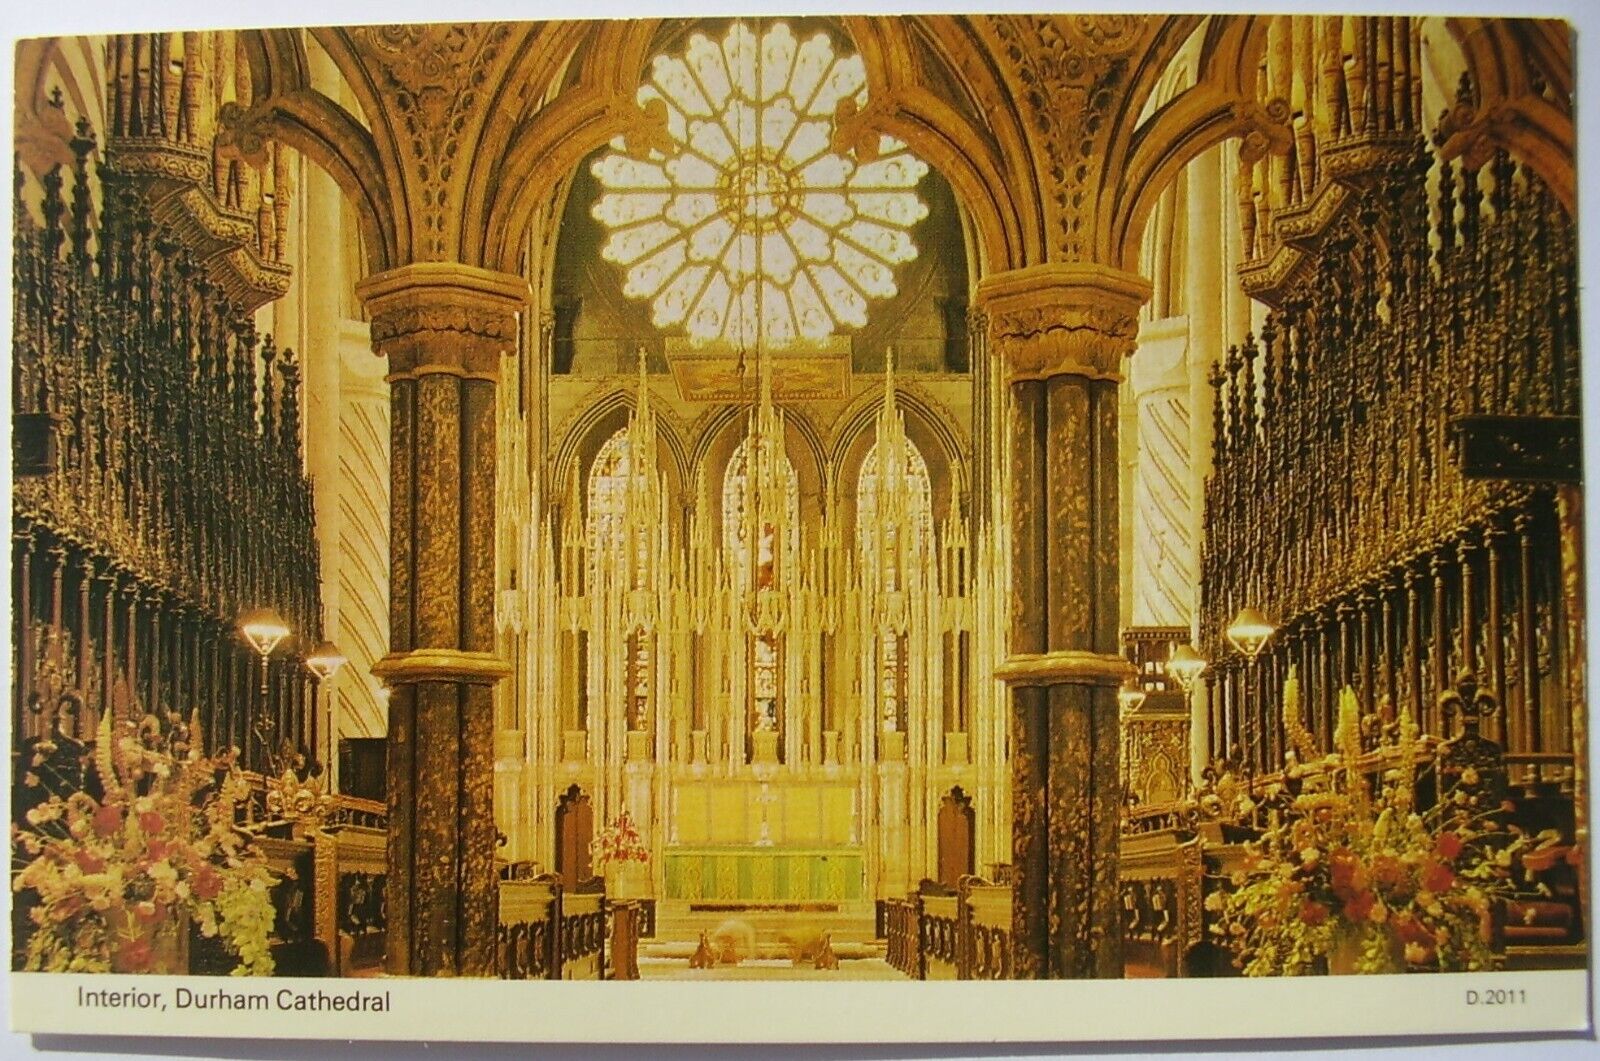 House Clearance - Dennis colour service of Interior, Durham Cathedral 1960s